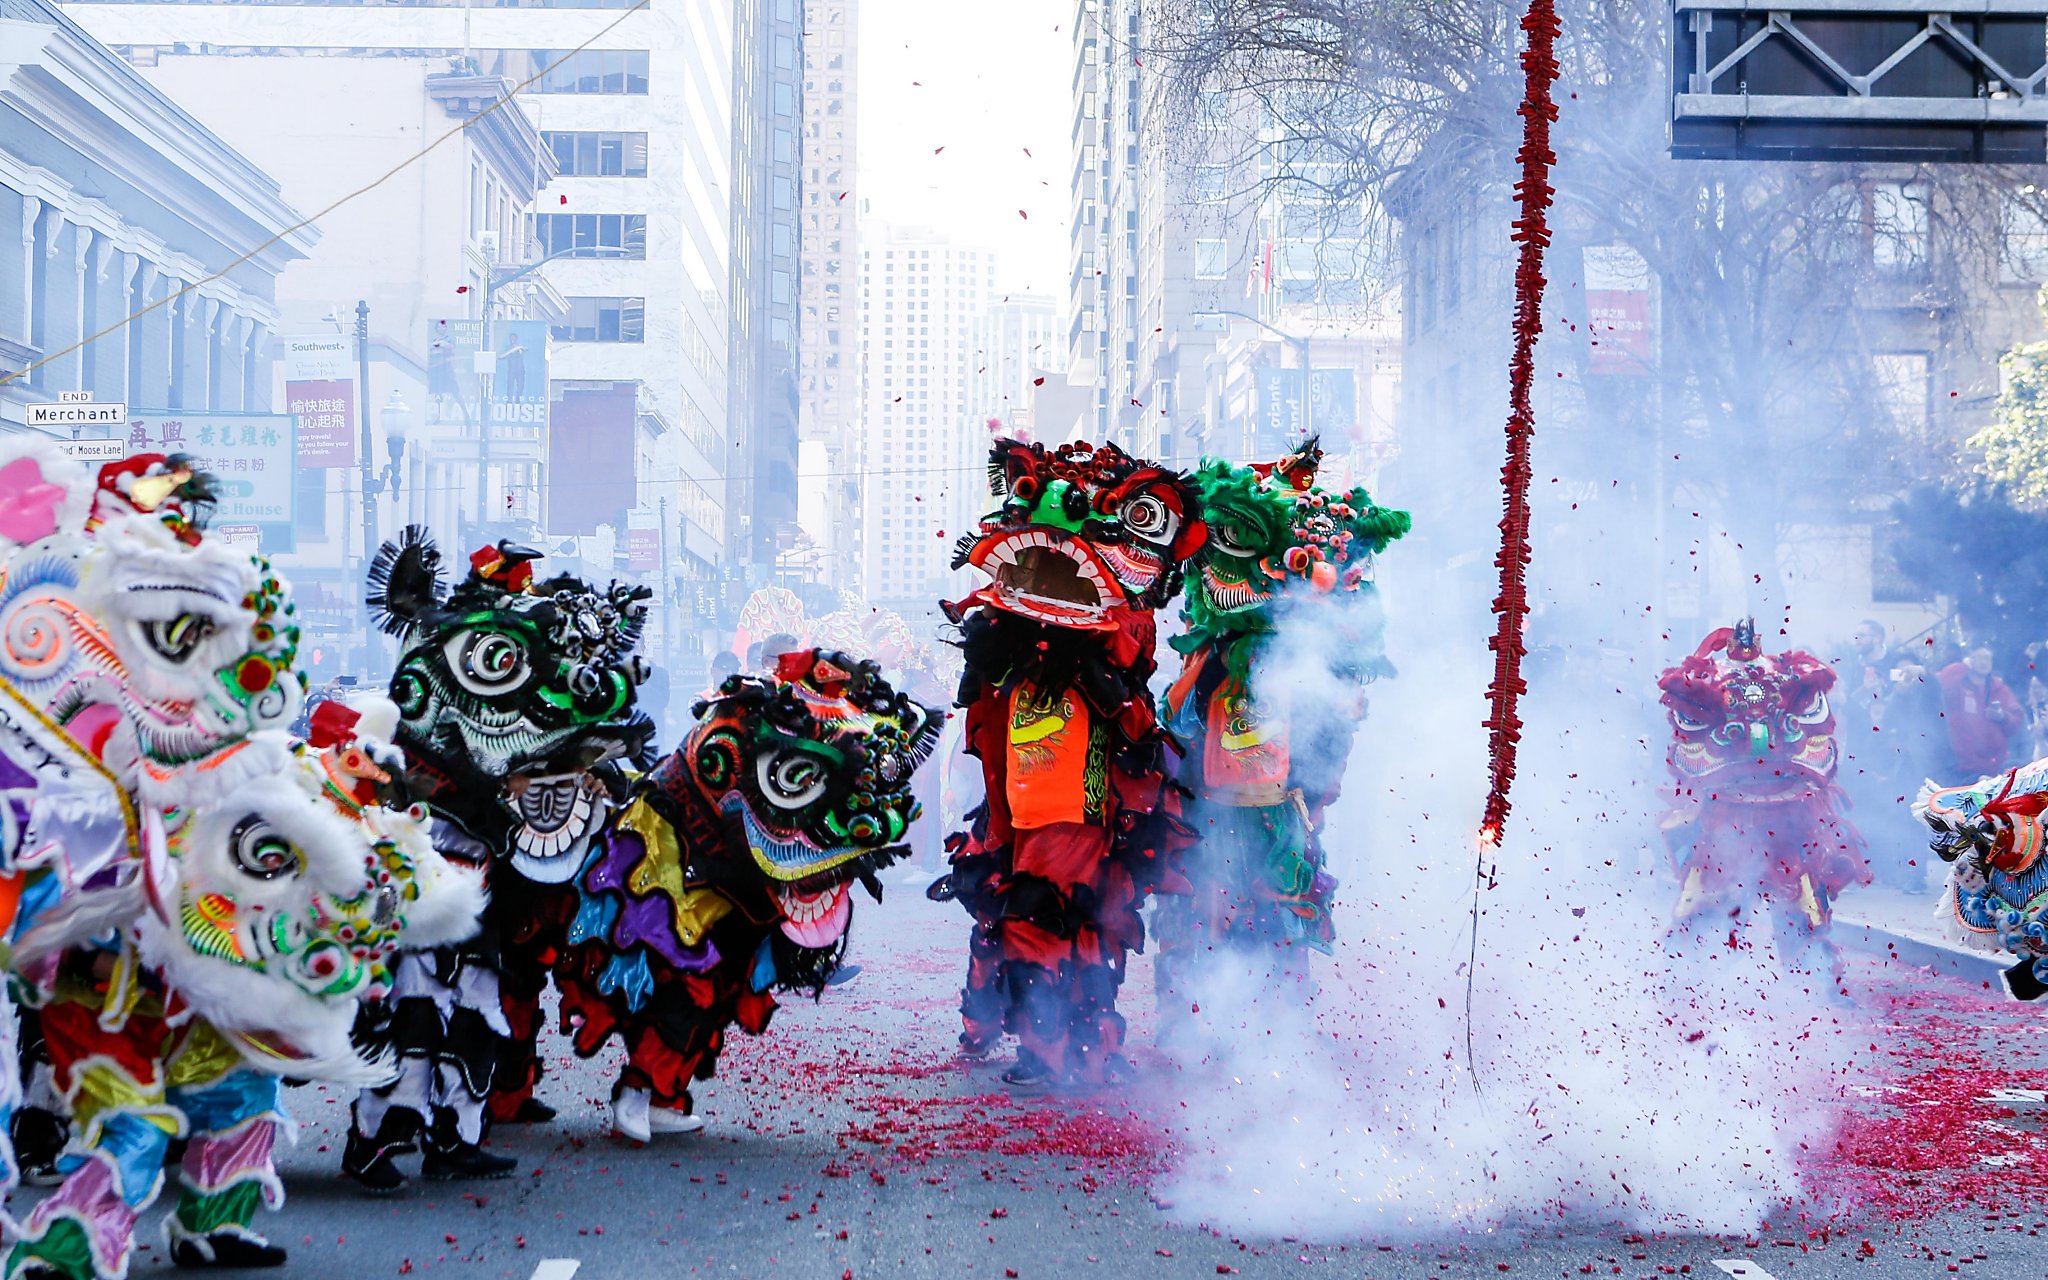 Piglets, firecrackers and dance: SF's Chinatown rings in Lunar New